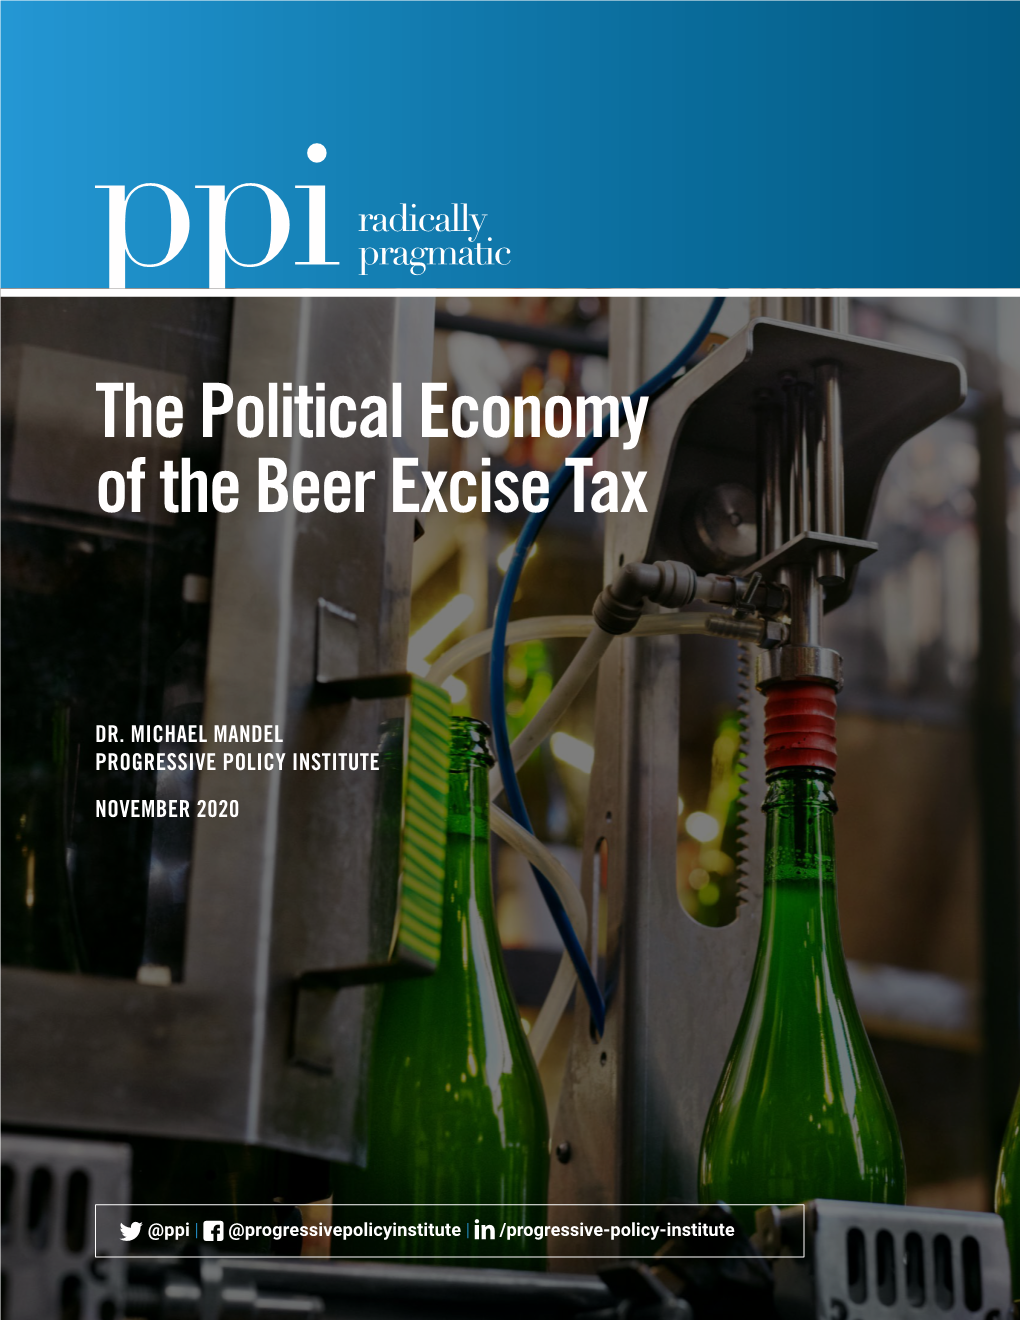 The Political Economy of the Beer Excise Tax